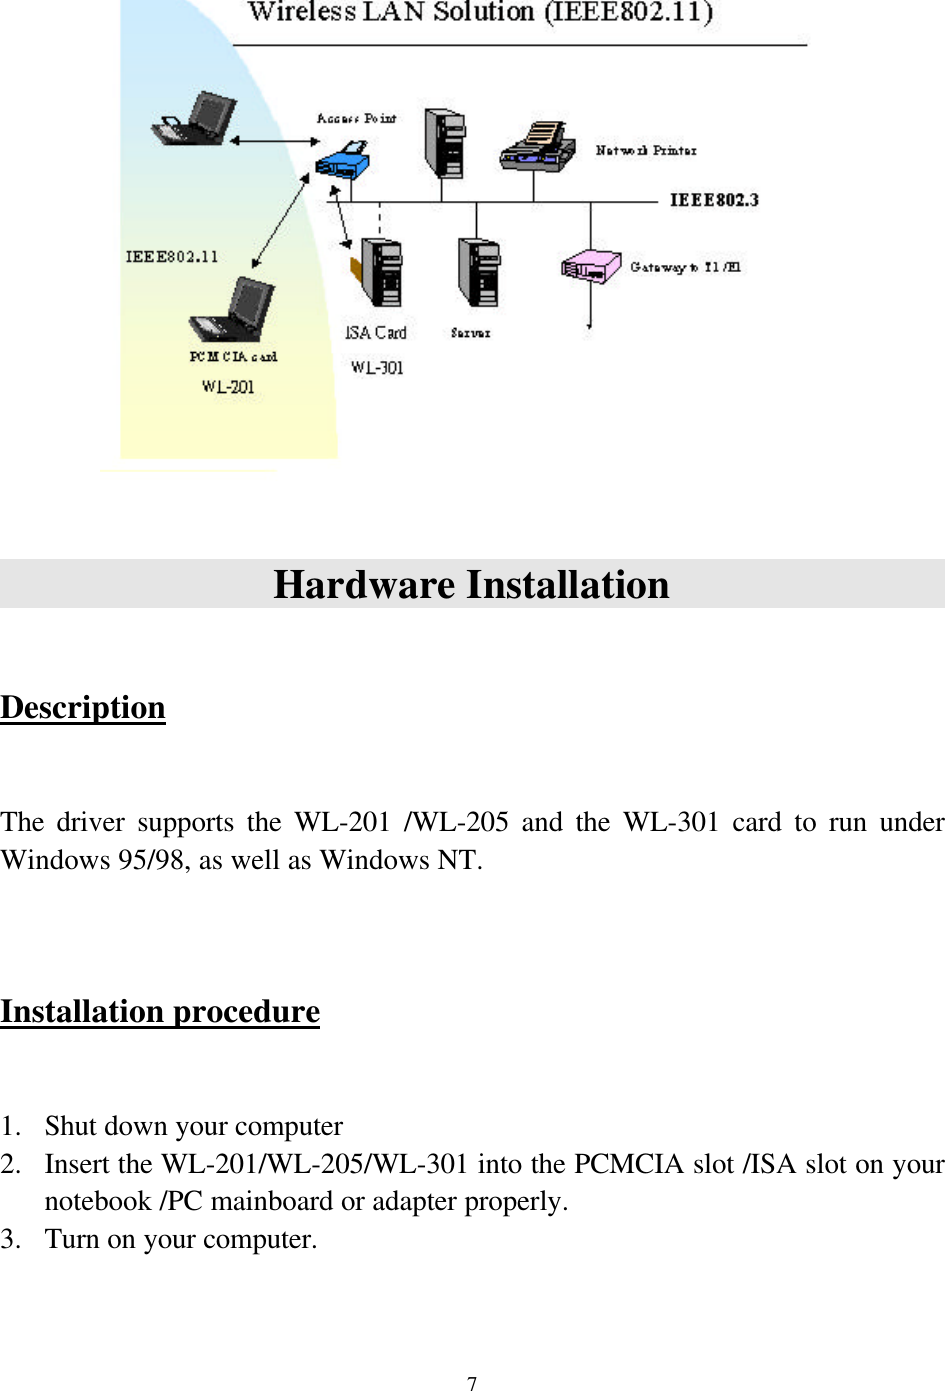 7Hardware InstallationDescriptionThe driver supports the WL-201 /WL-205 and the WL-301 card to run underWindows 95/98, as well as Windows NT.Installation procedure1.  Shut down your computer2.  Insert the WL-201/WL-205/WL-301 into the PCMCIA slot /ISA slot on yournotebook /PC mainboard or adapter properly.3.  Turn on your computer.